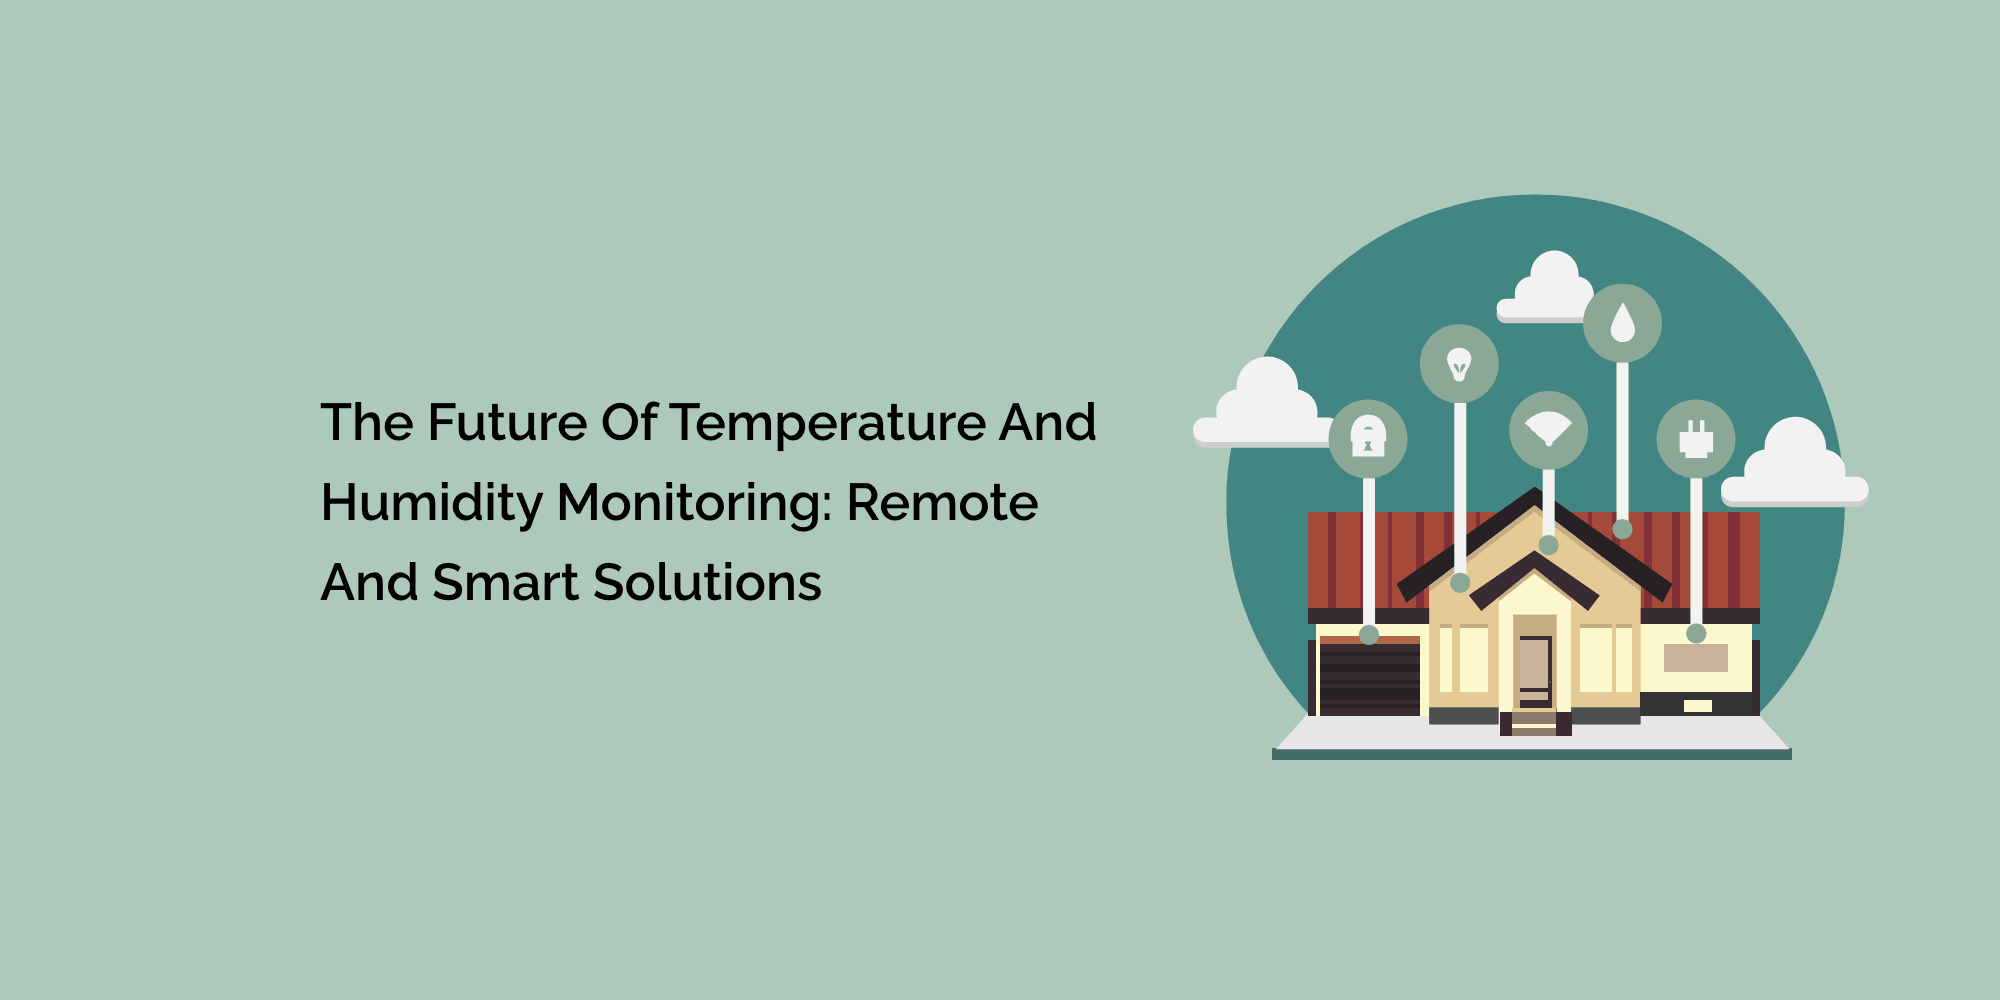 The Future of Temperature and Humidity Monitoring: Remote and Smart Solutions